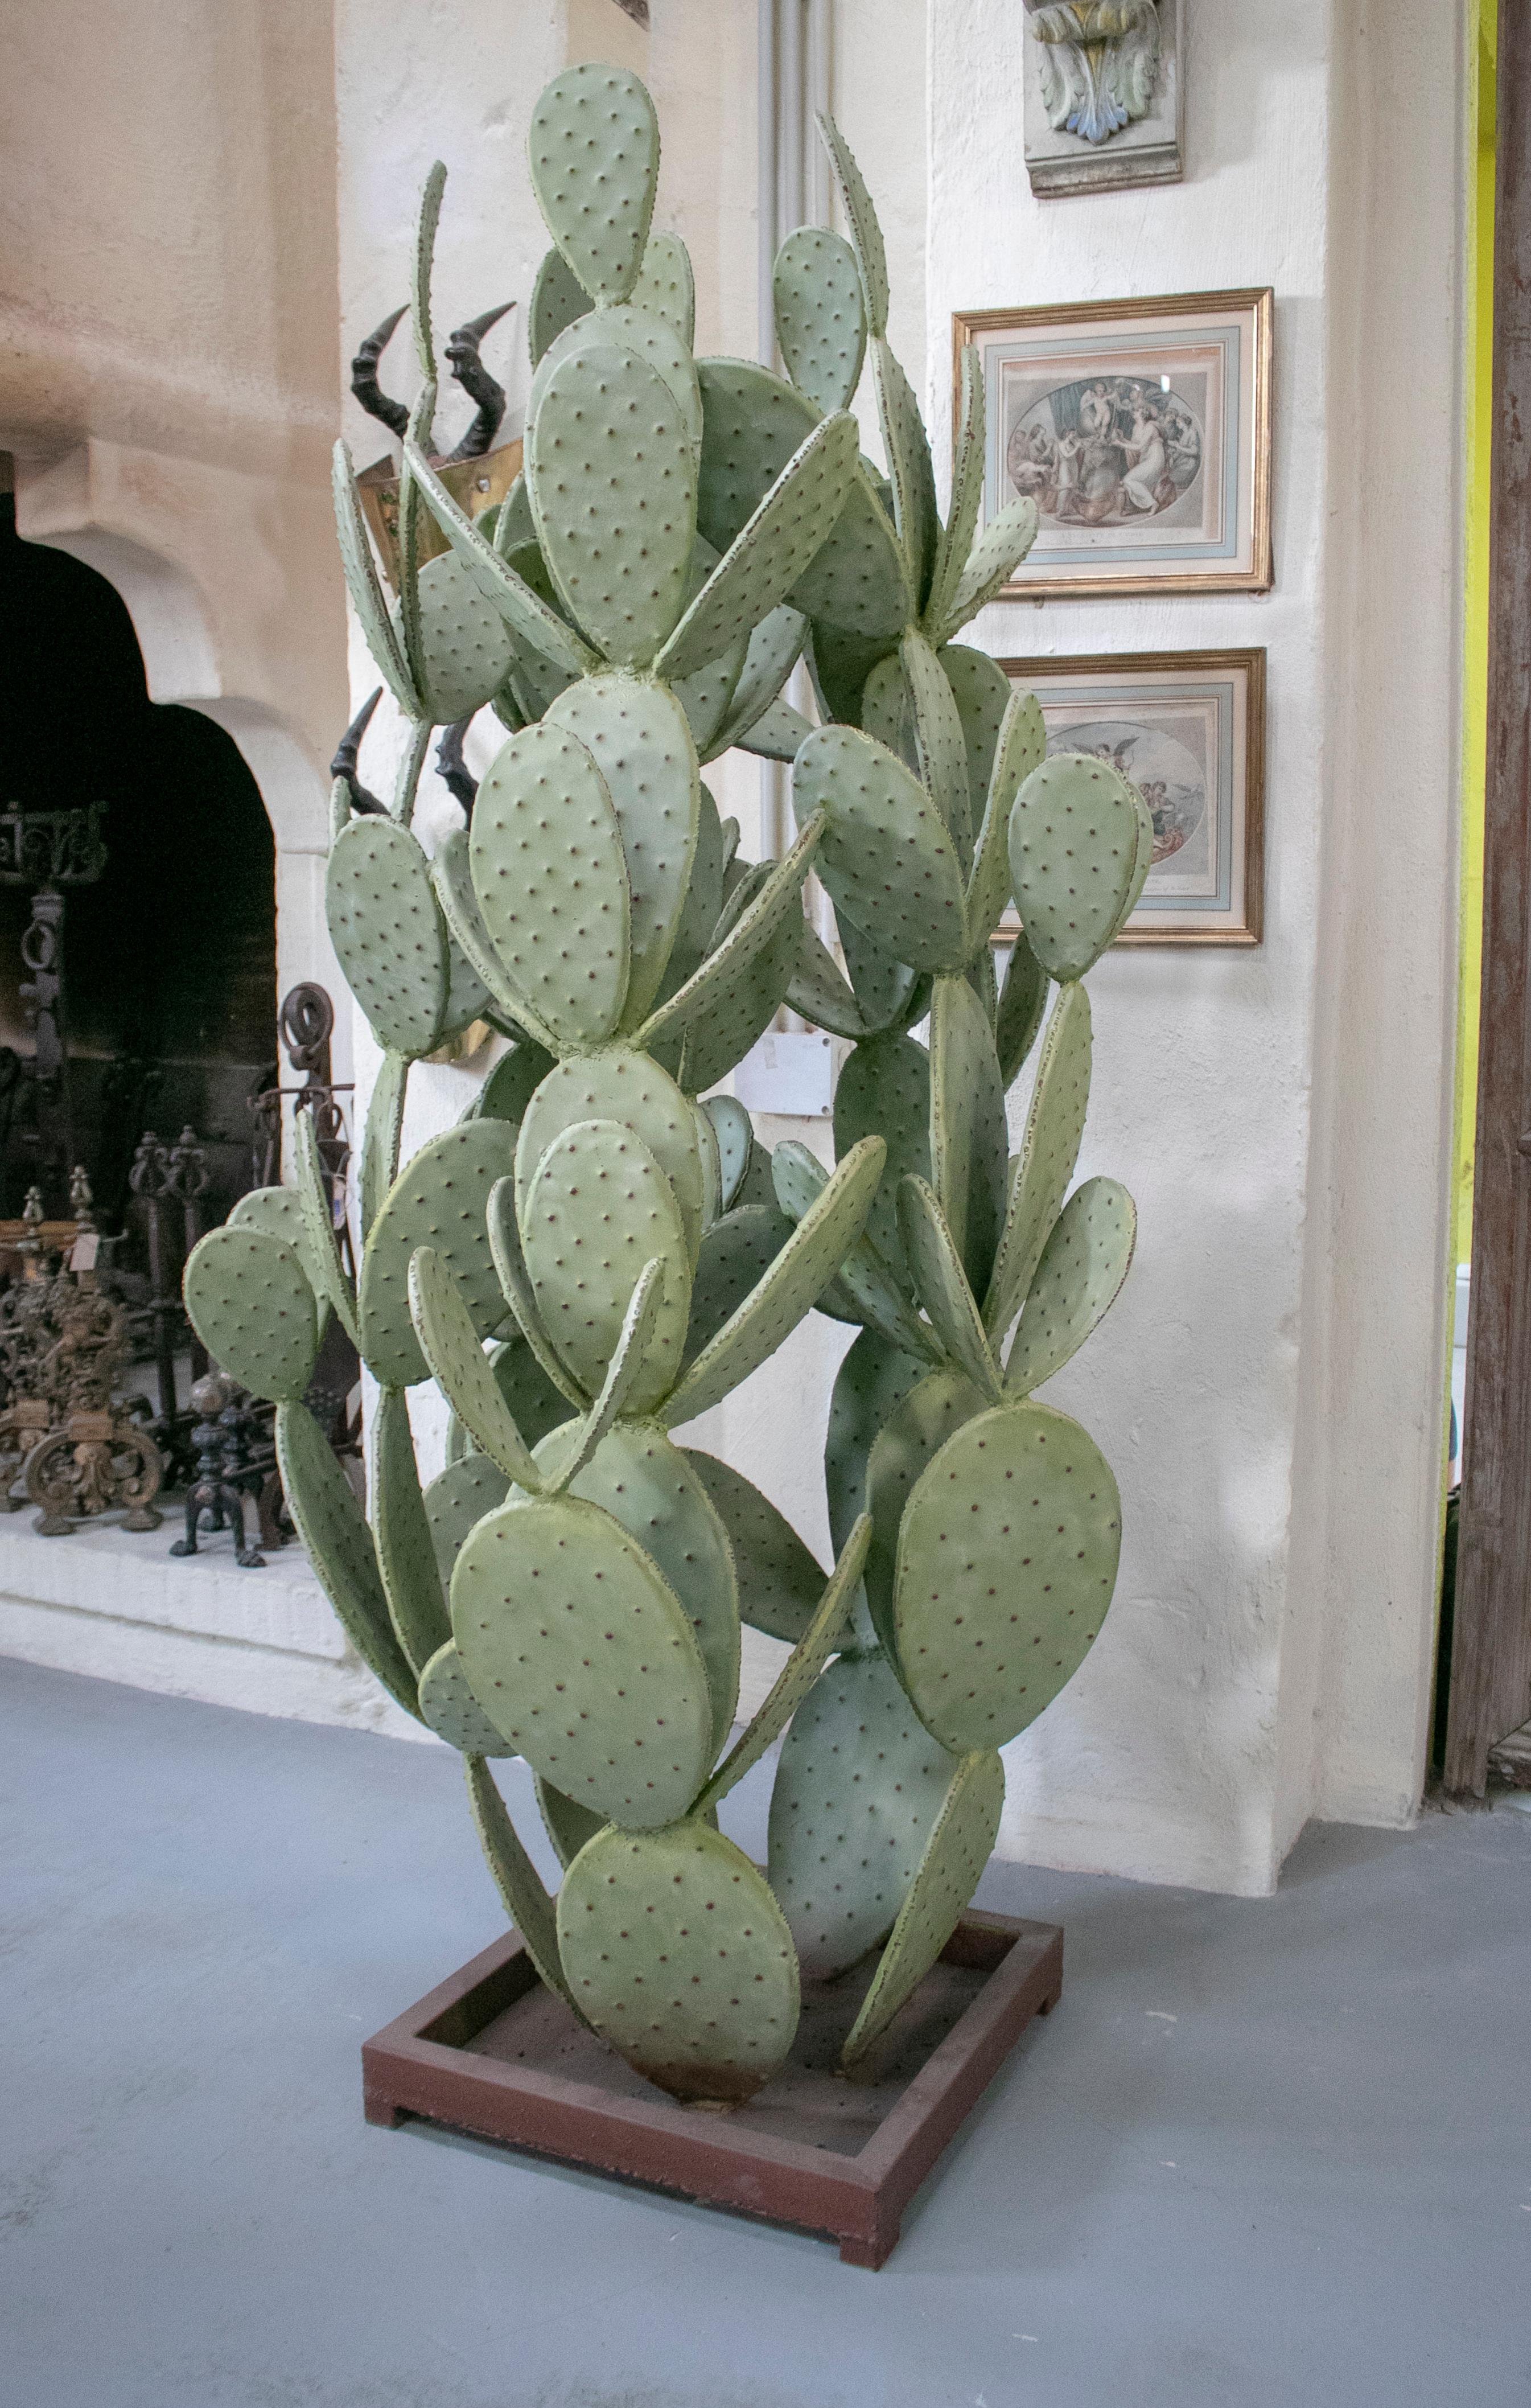 1990s French iron green cactus sculpture.